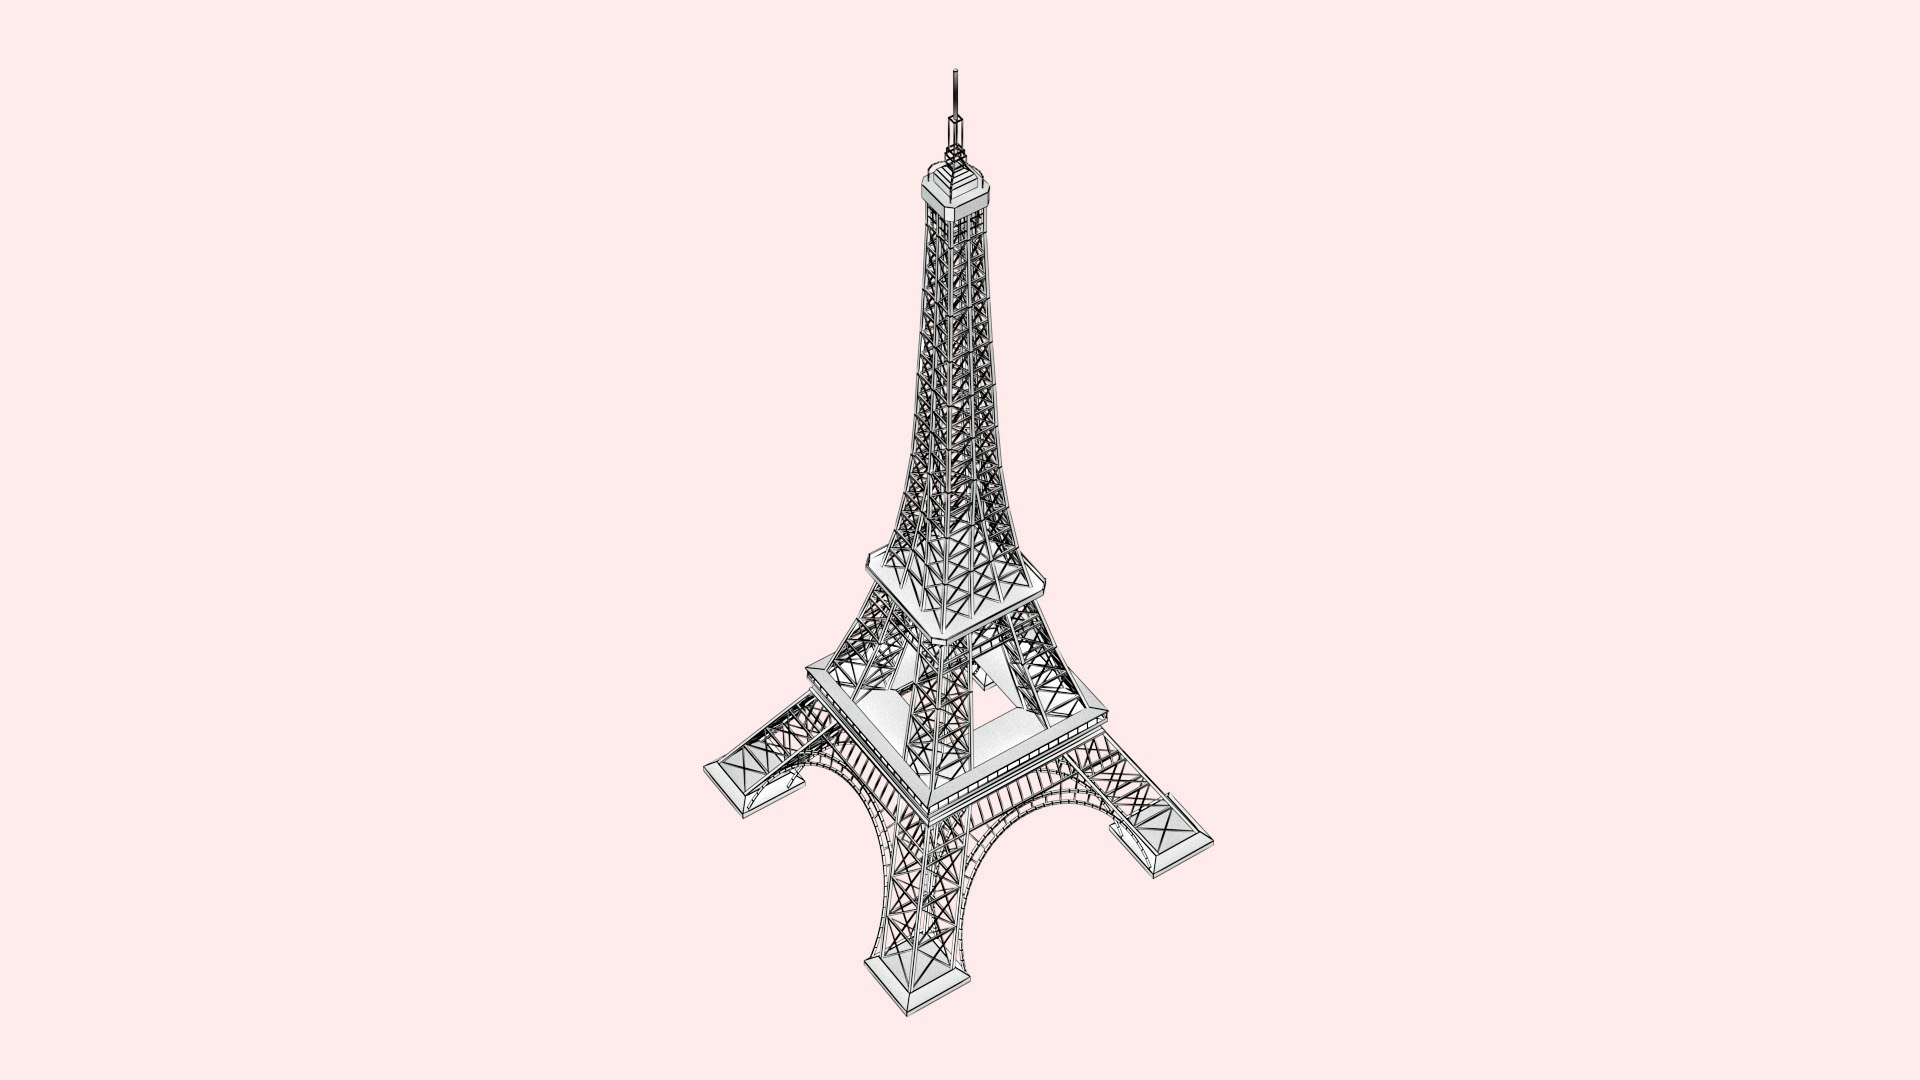 3D model Eiffel Tower day and night - TurboSquid 2101418